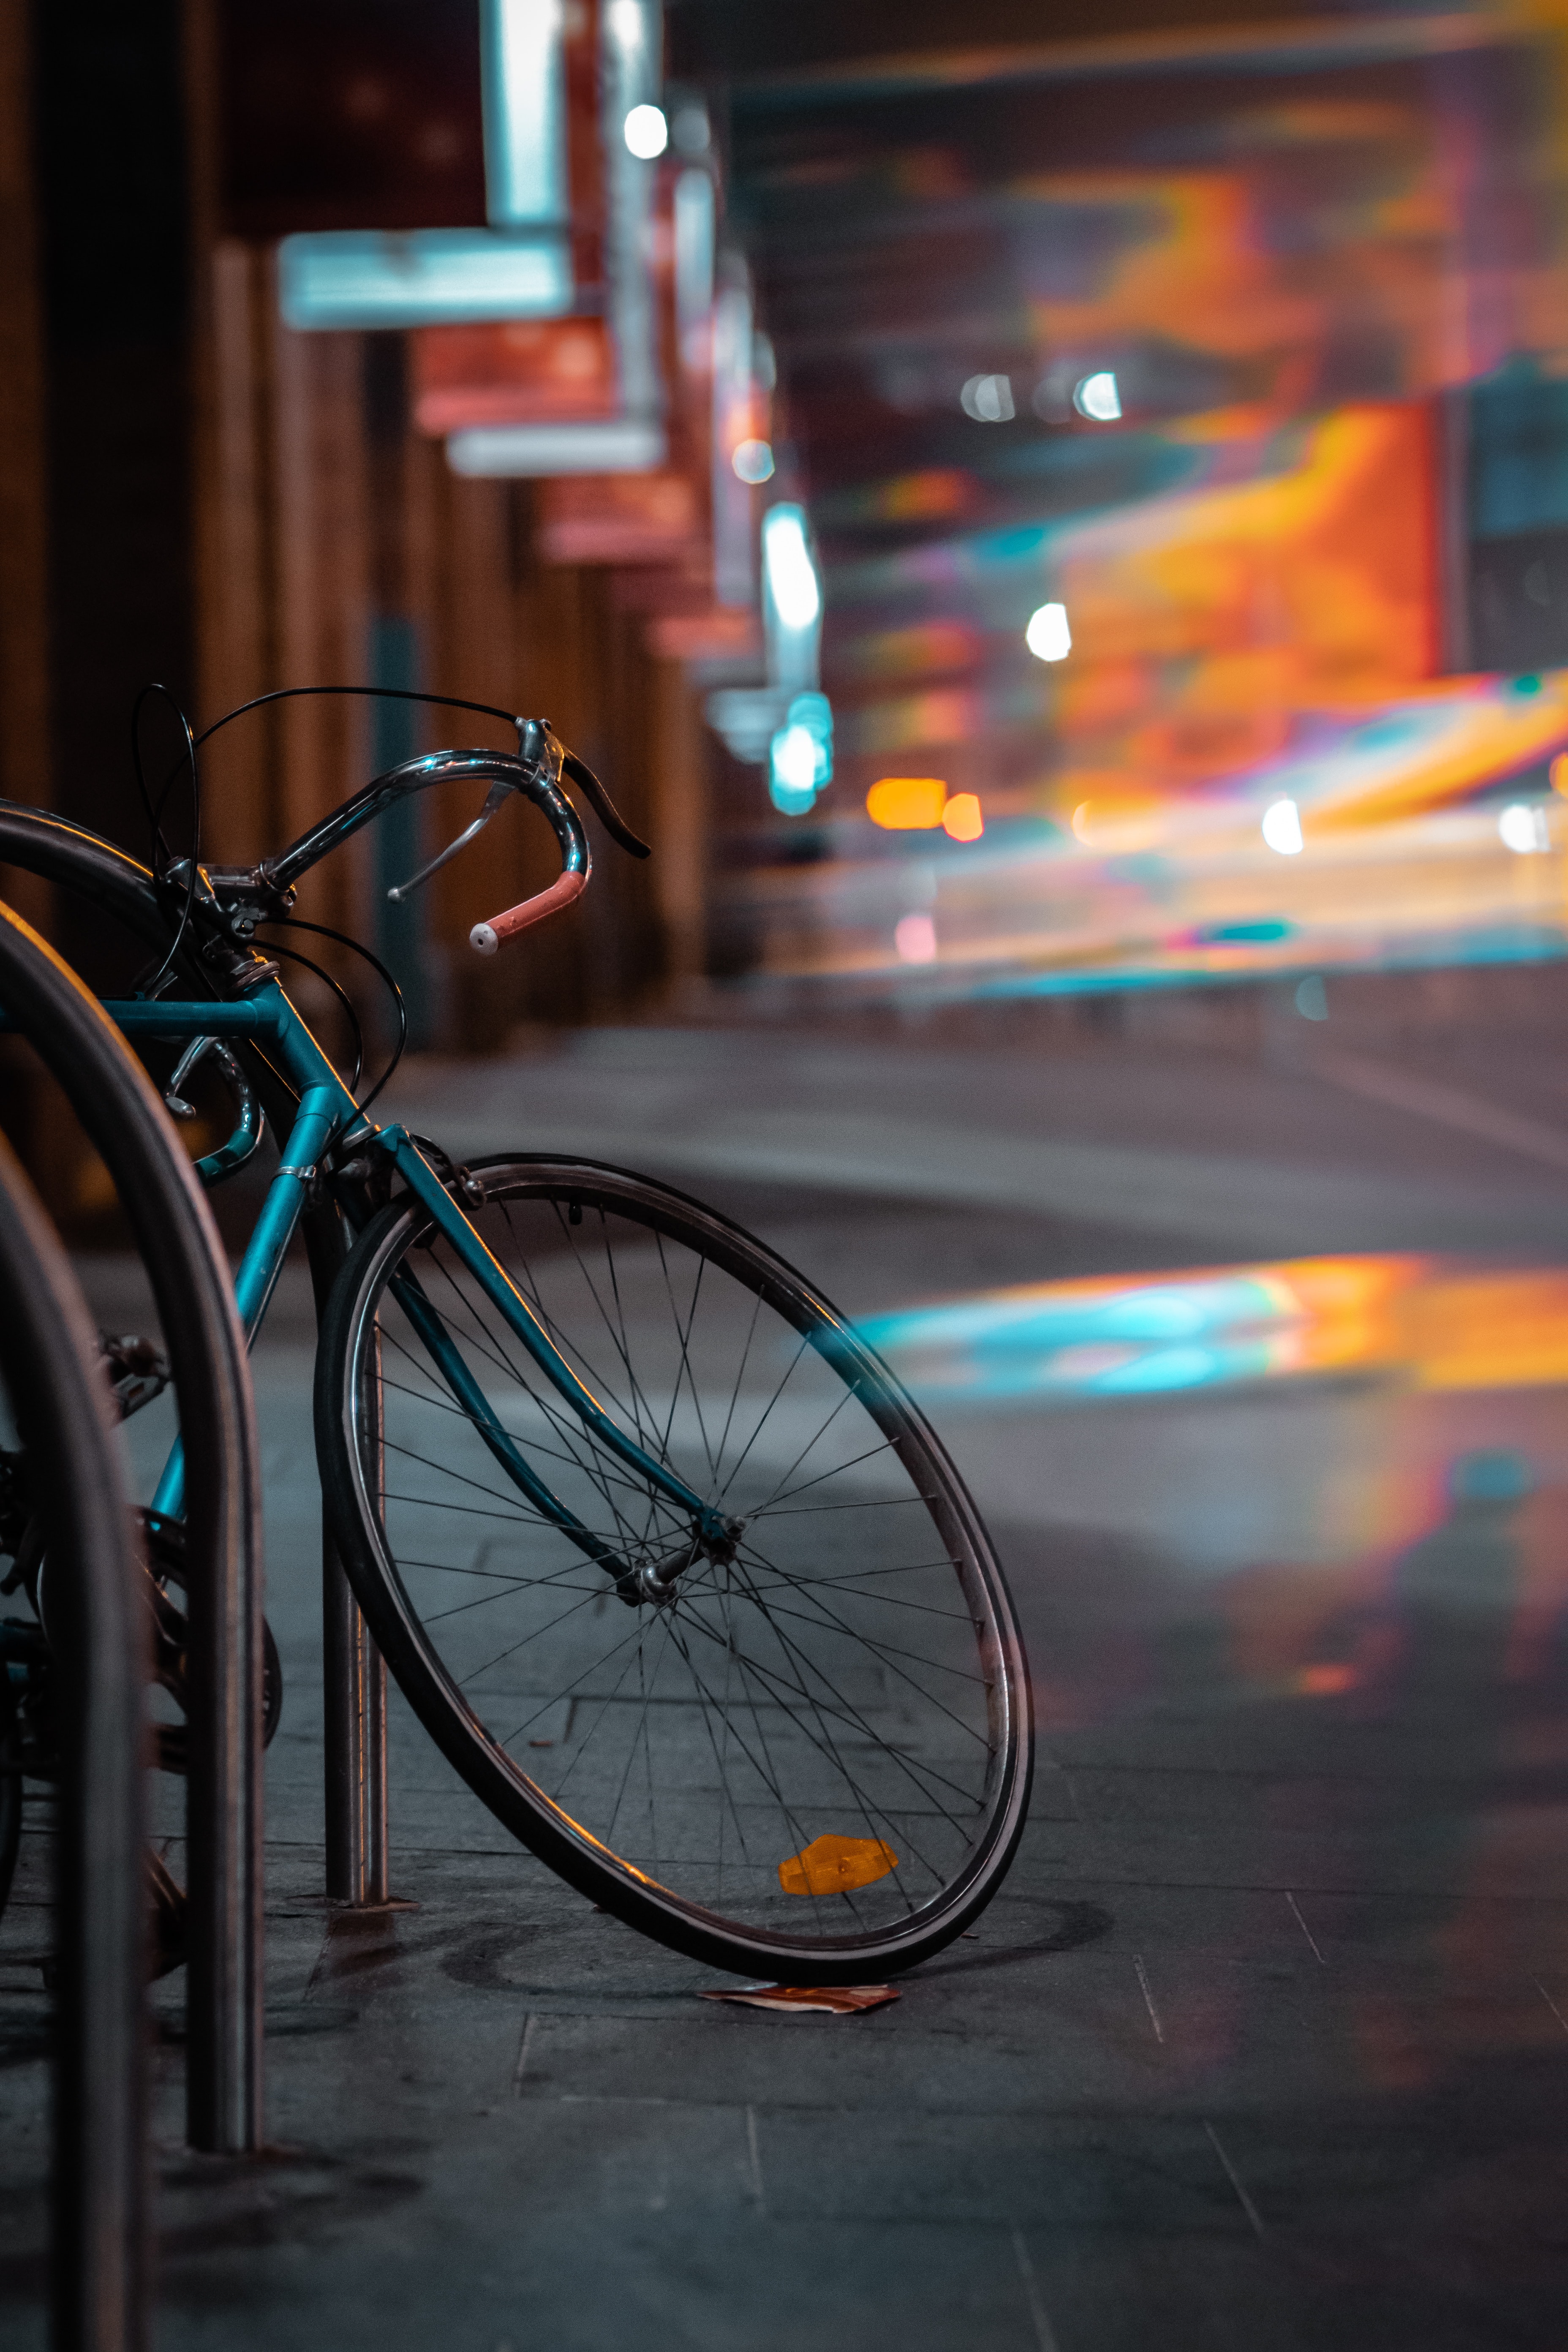 blur, miscellaneous, bicycle, transport, glare, miscellanea, smooth, evening, wheels 2160p